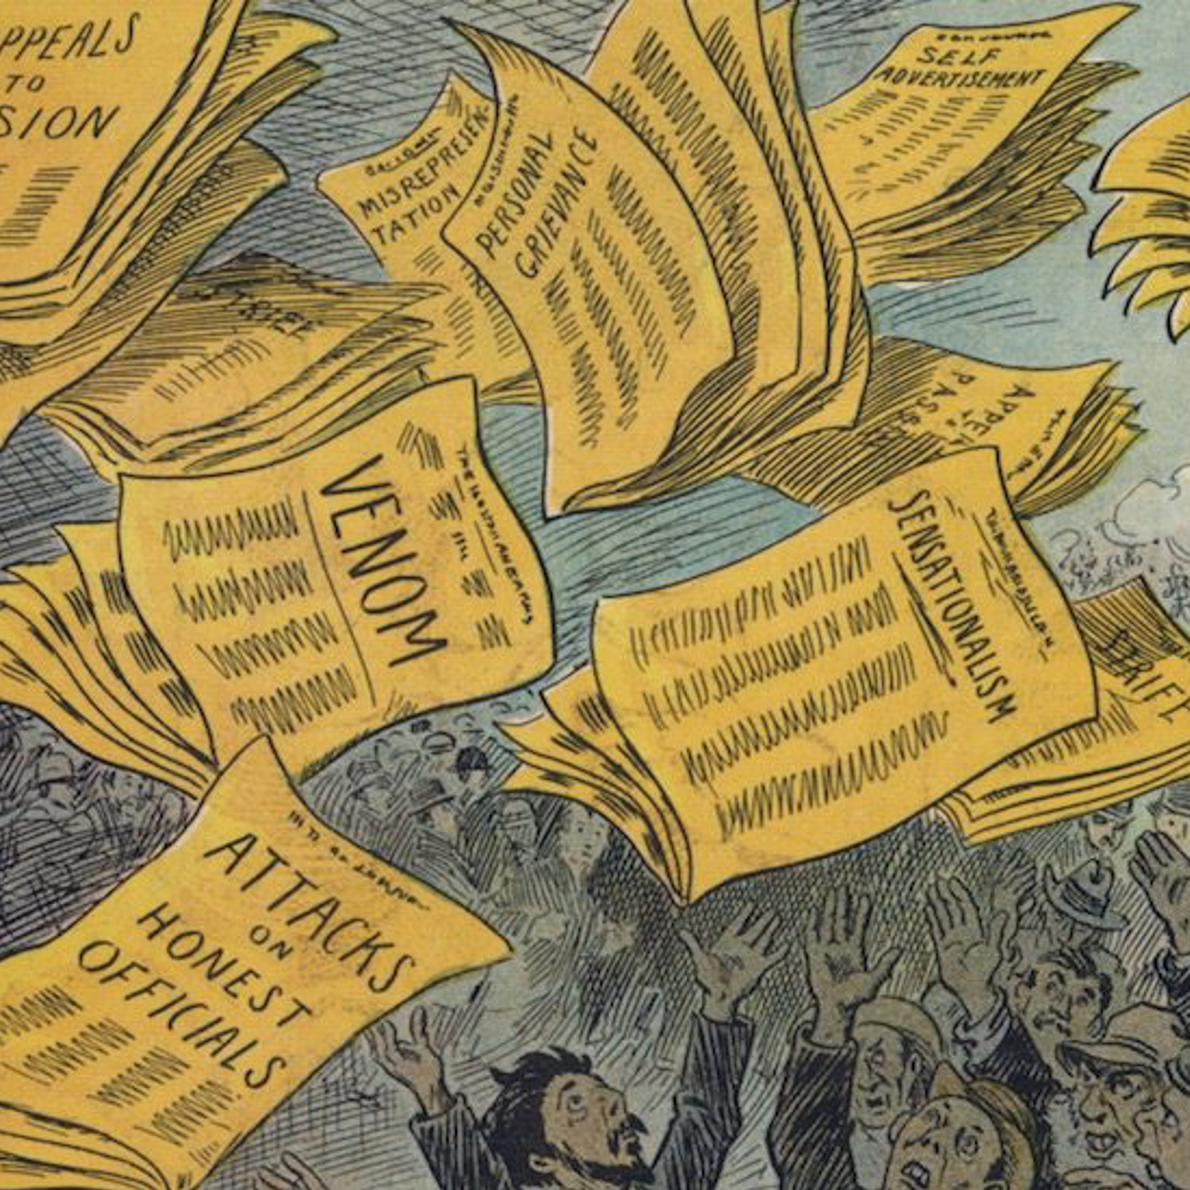 an old-fashioned cartoon of someone throwing yellow newspapers in the air. Headlines say "Venom" "Attacks on honest officials "Sensationalism"